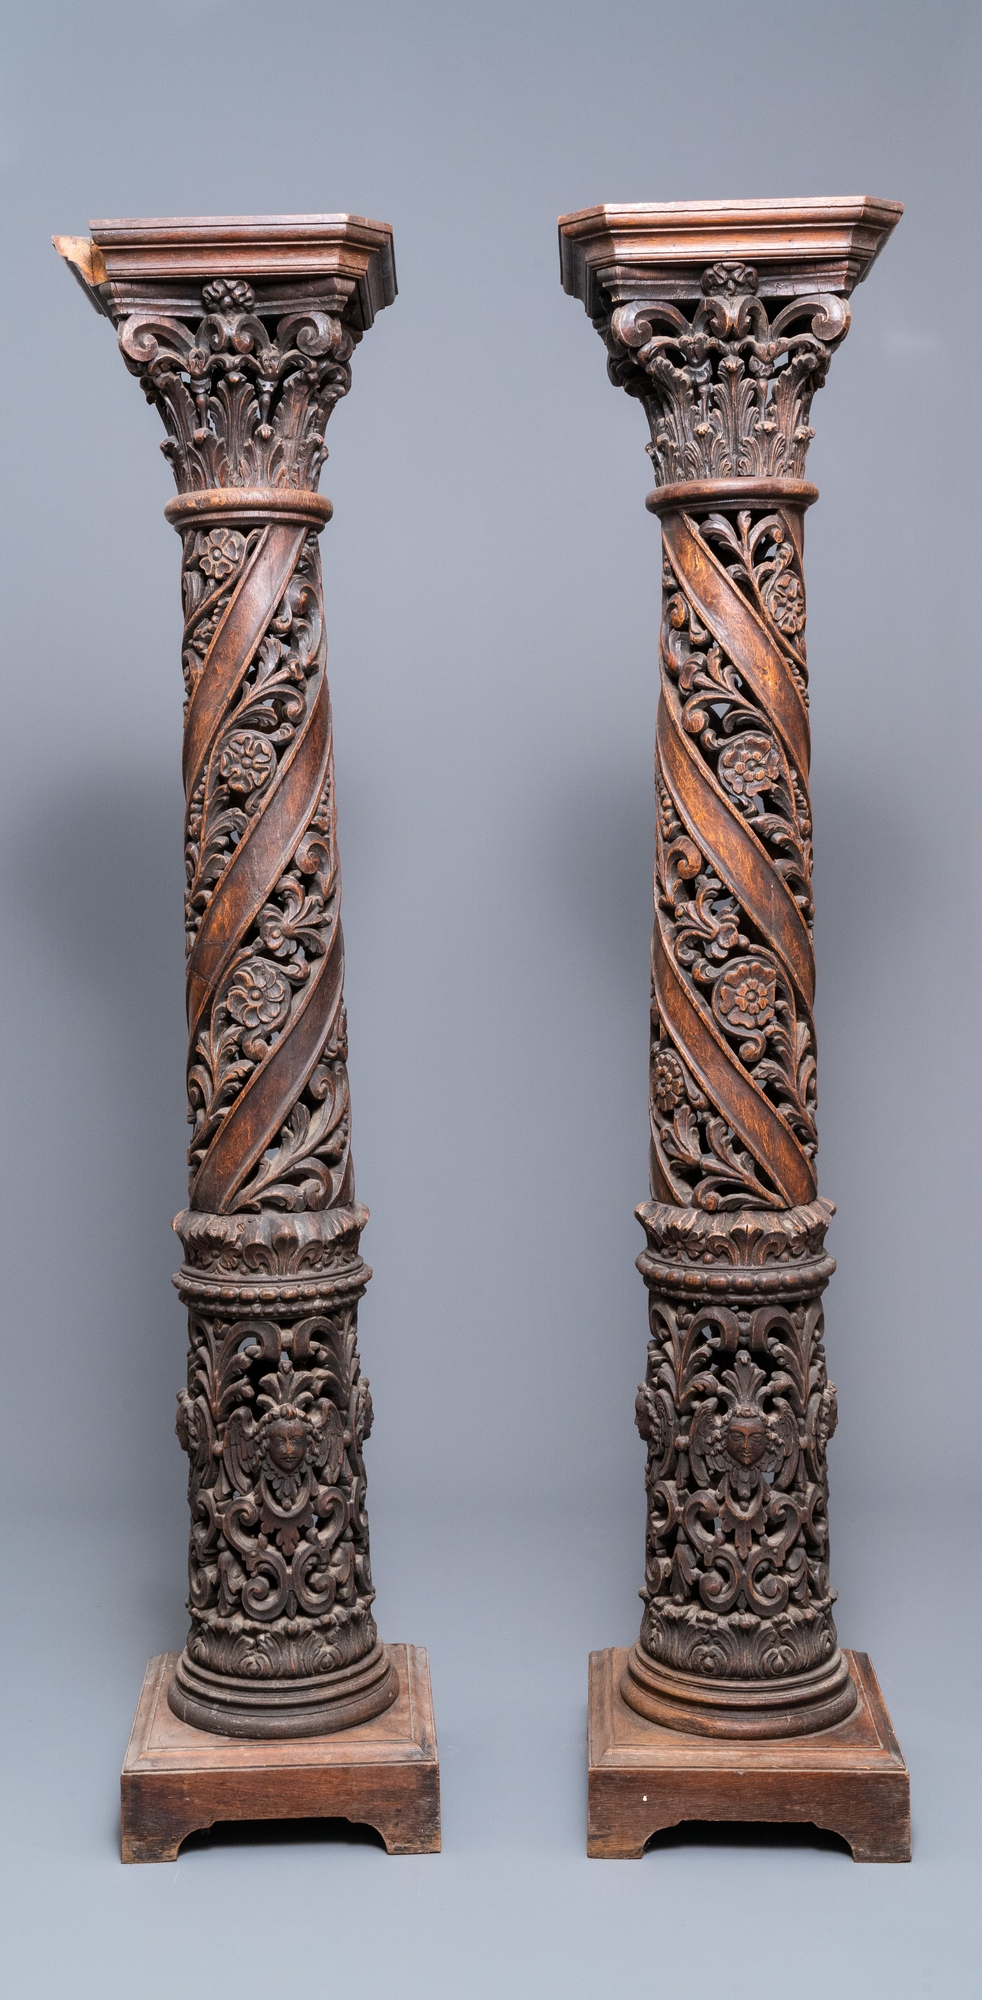 A pair of reticulated carved oak Corinthian columns with cherub heads and vines, 17th C. - Image 3 of 7